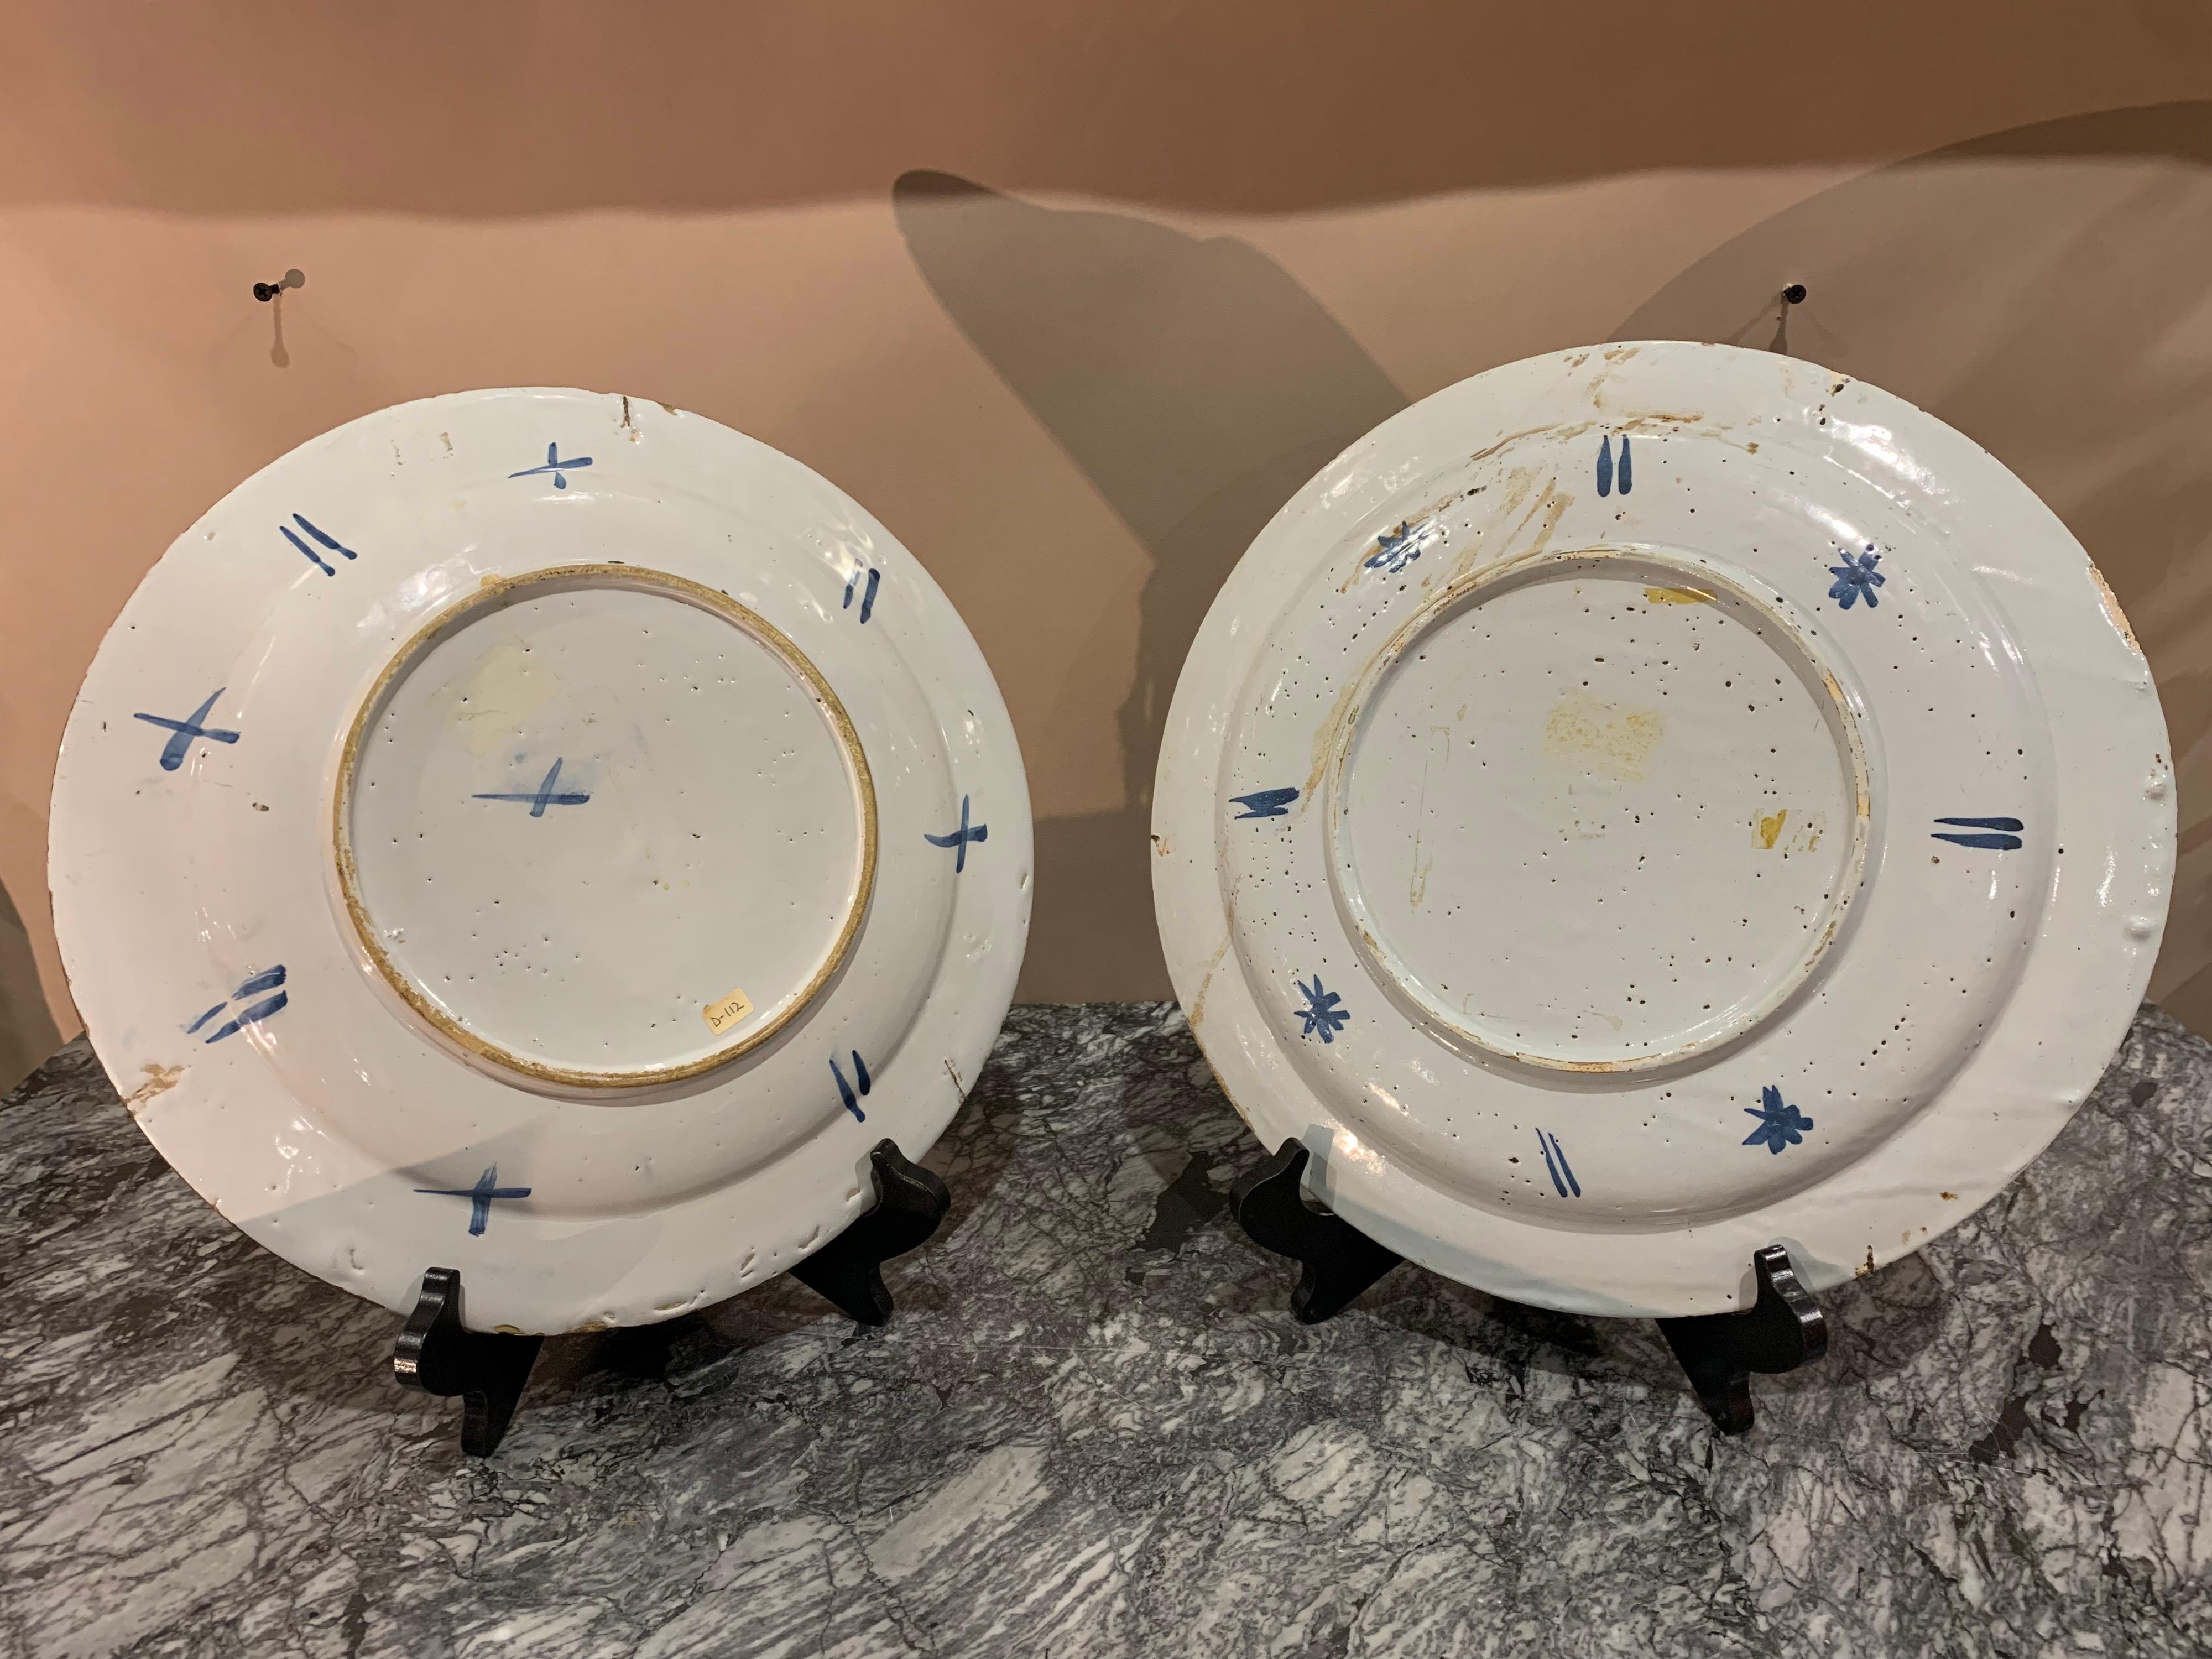 Near pair of 18th century English polychrome delft chargers- Measure: 13” diameter.